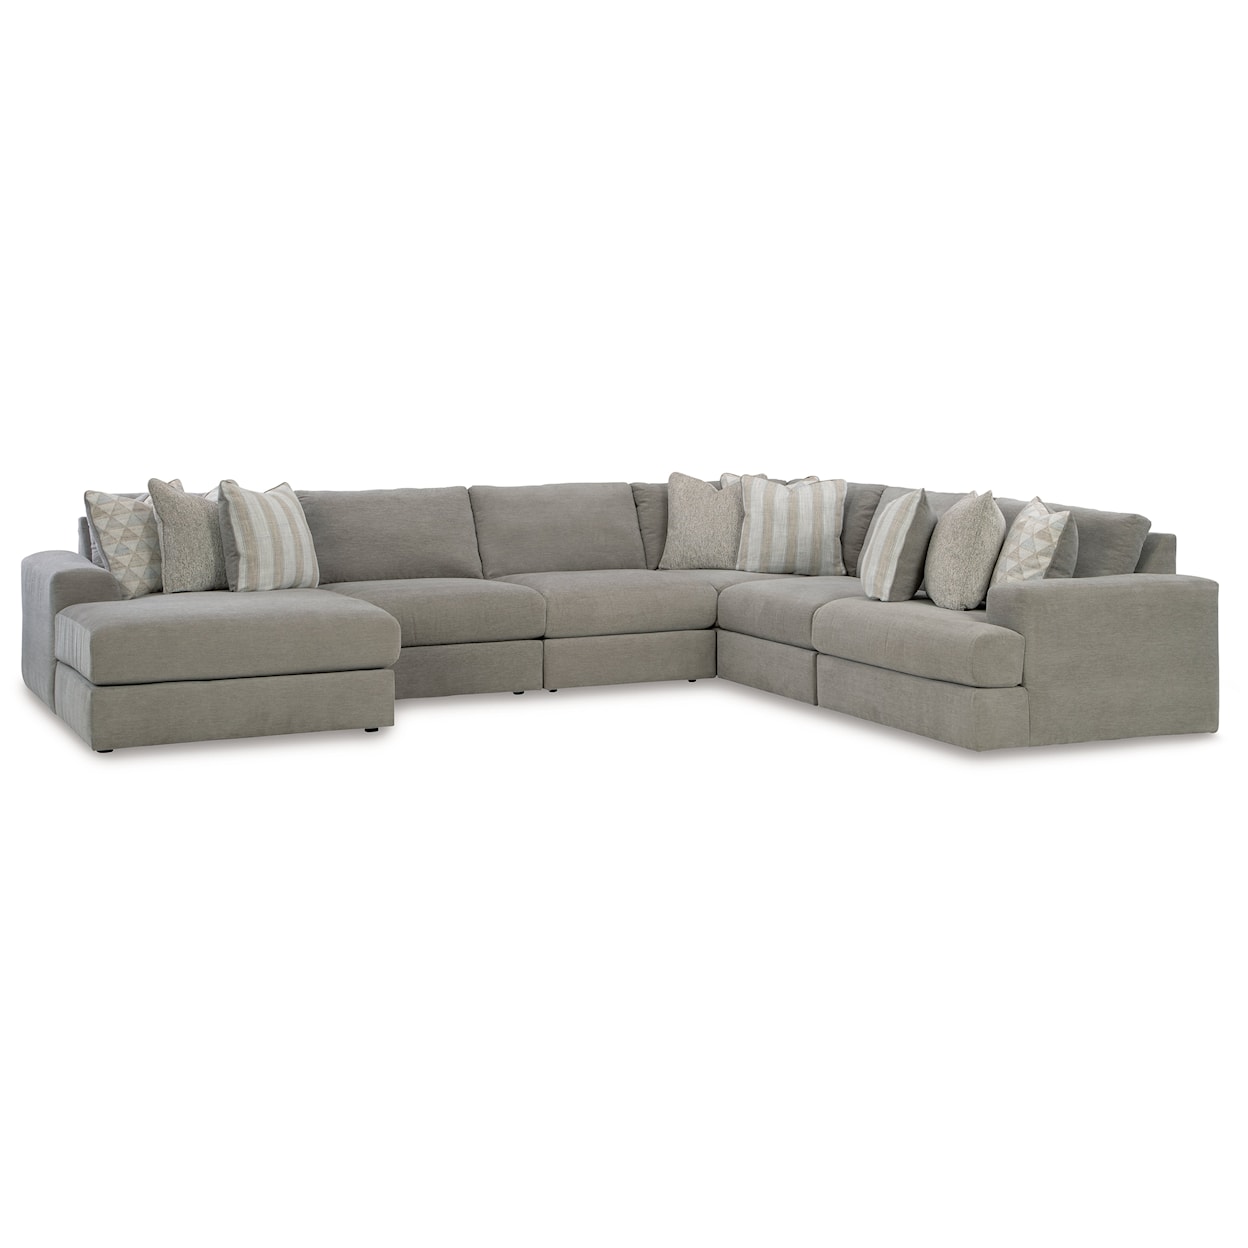 Signature Design by Ashley Avaliyah 6-Piece Sectional